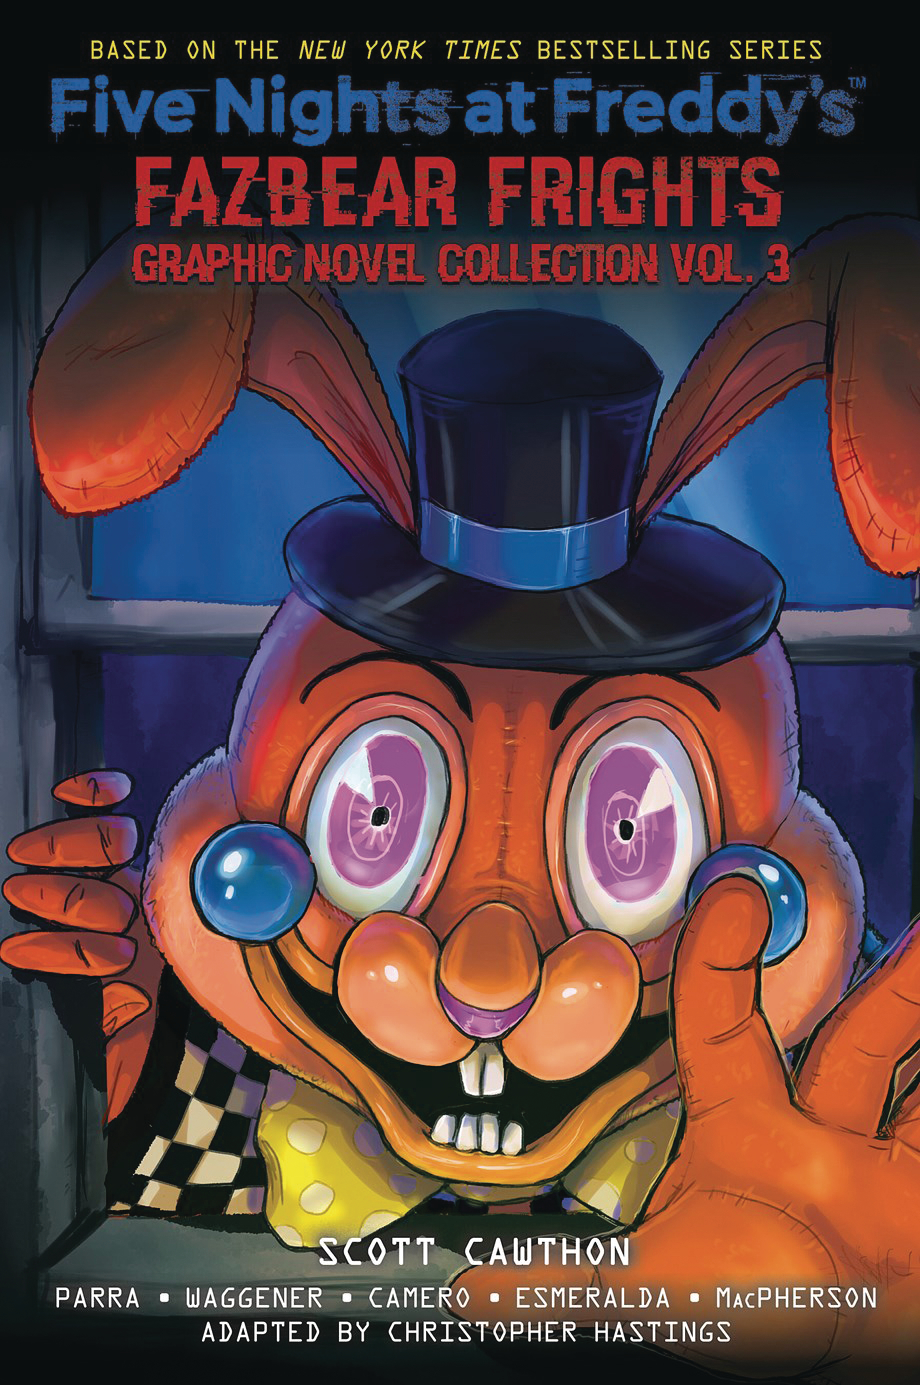 Five Nights At Freddys Graphic Novel Collected Volume 3 Fazbear Frights